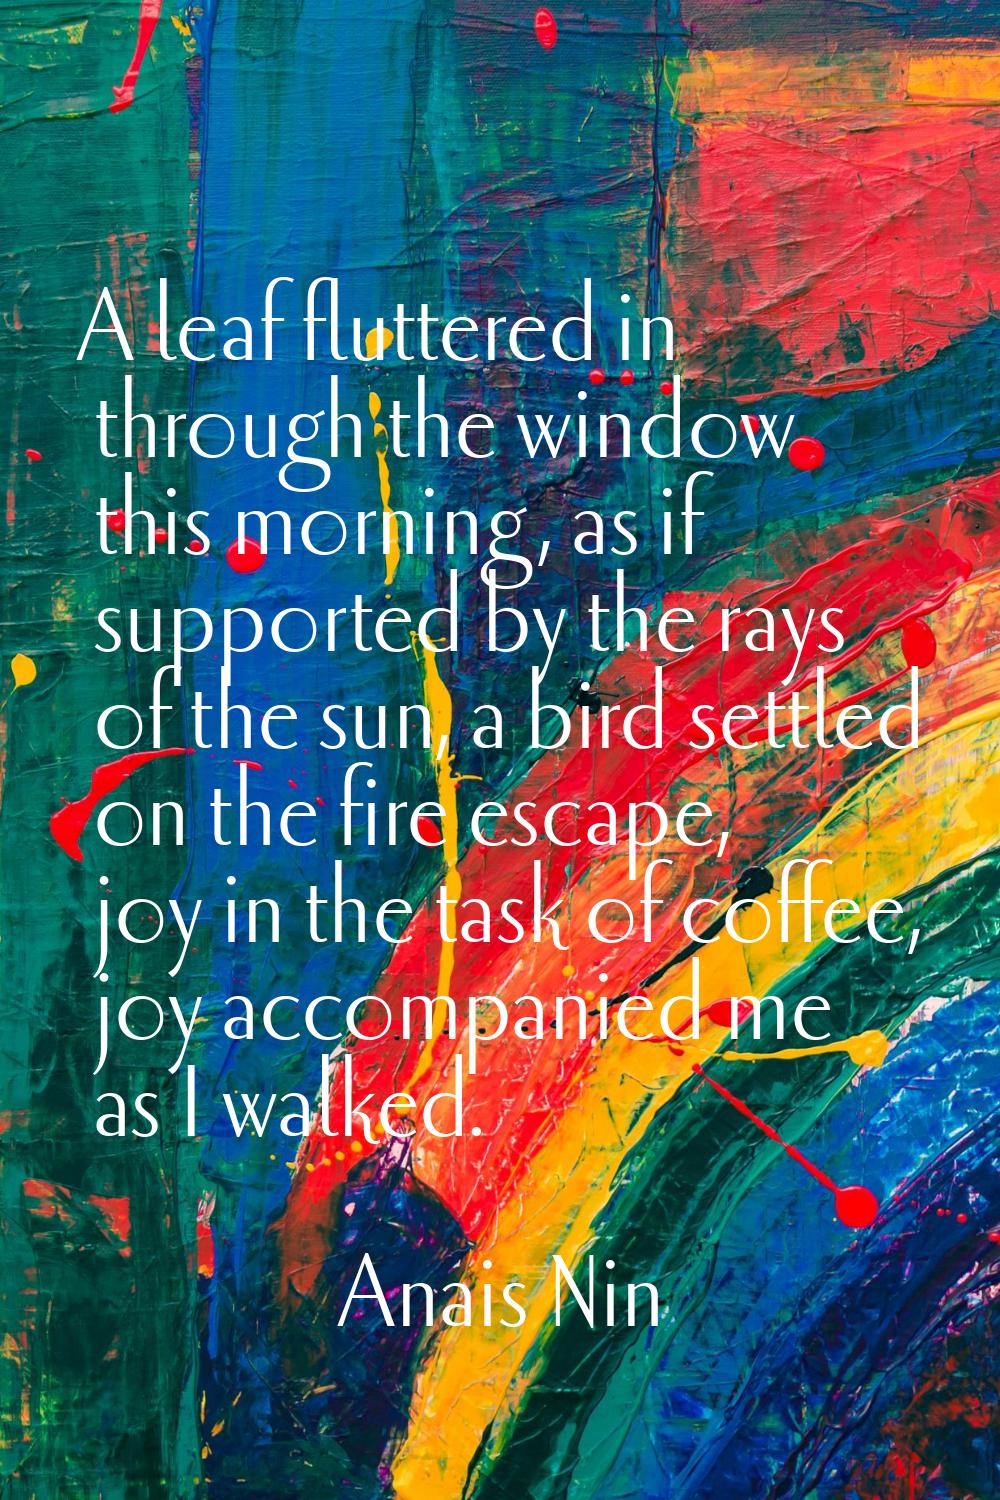 A leaf fluttered in through the window this morning, as if supported by the rays of the sun, a bird